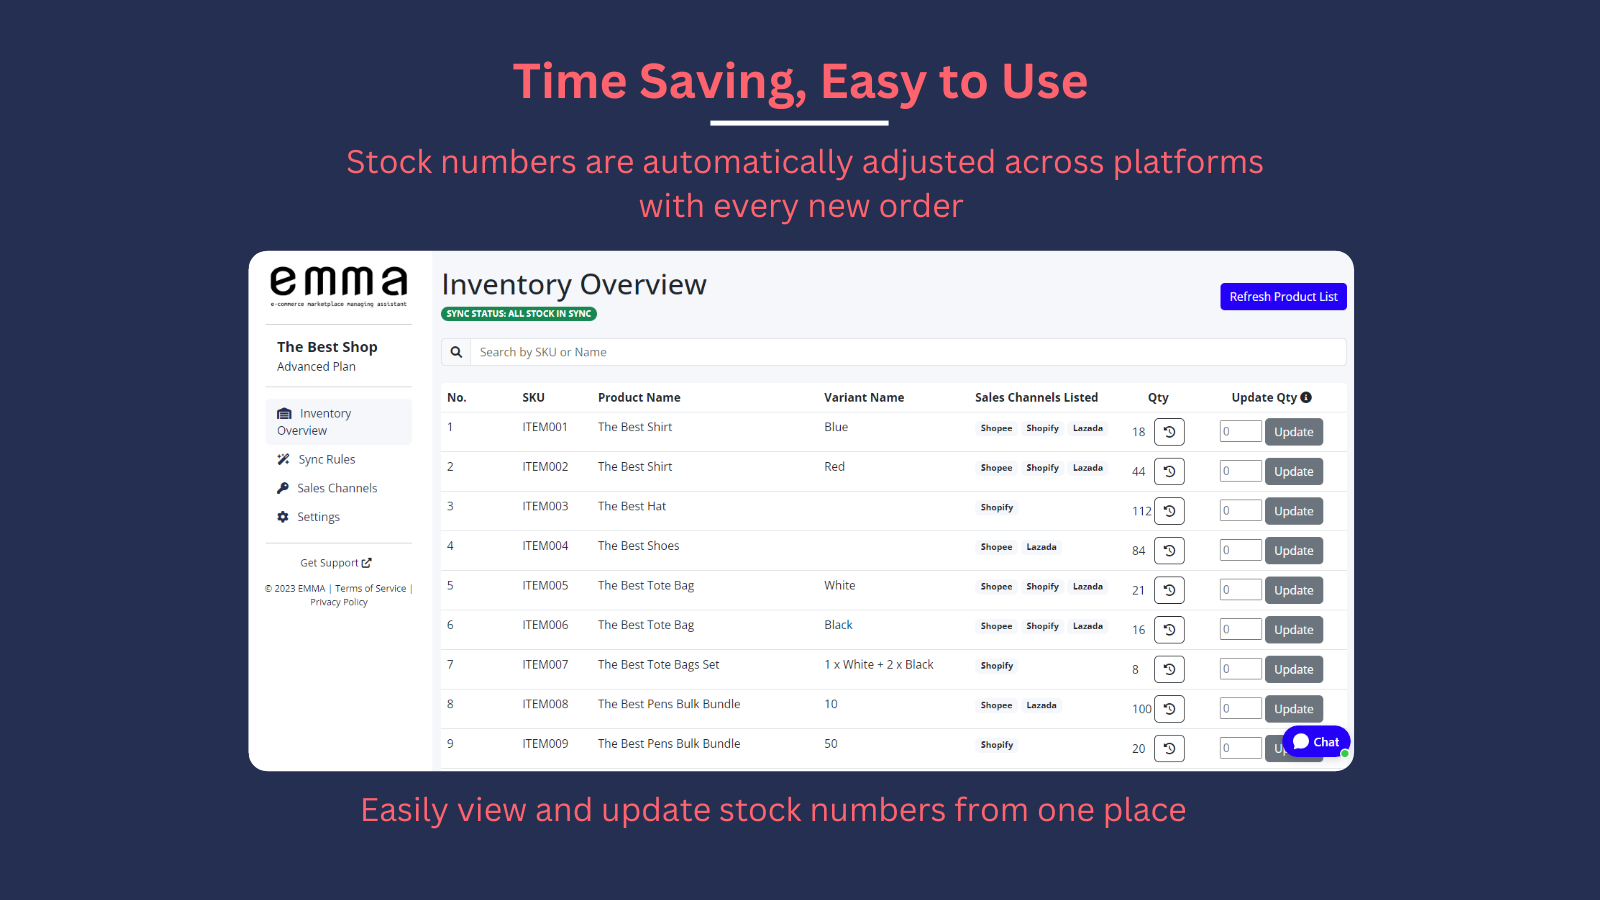 Time Saving and Easy to Use - Auto sync with every new order